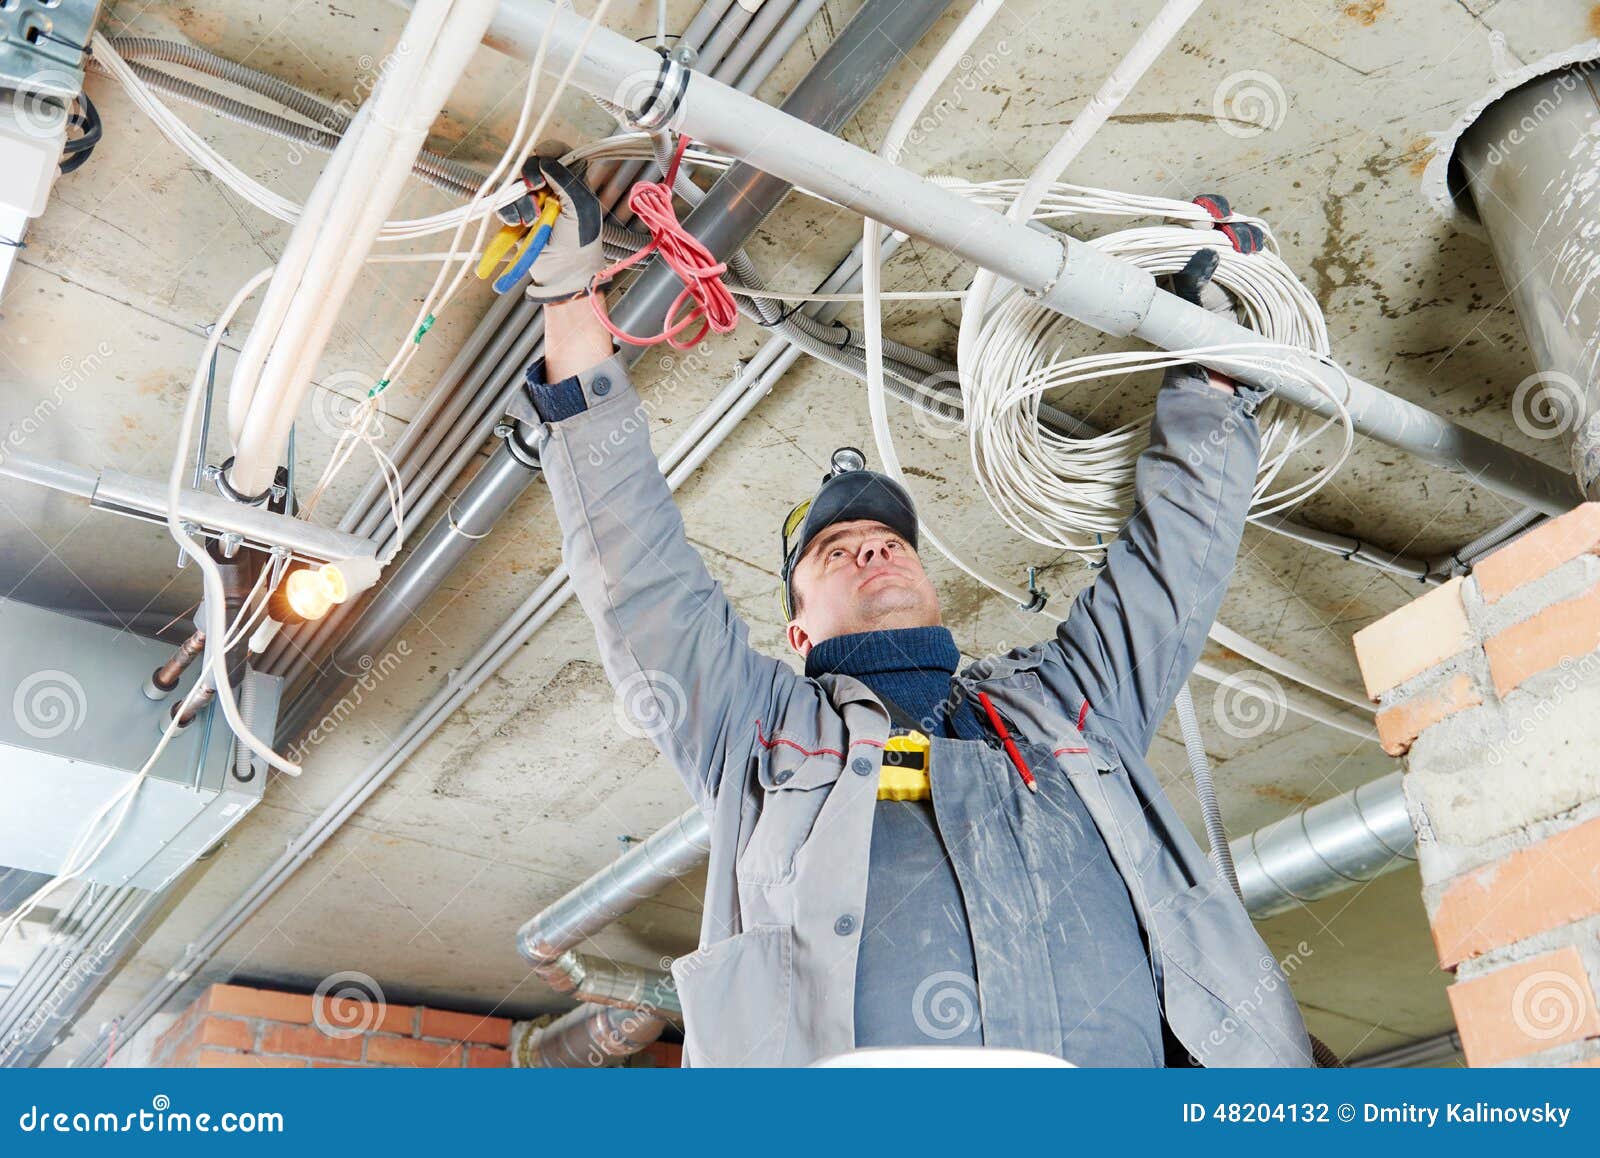 electrician working with cabling